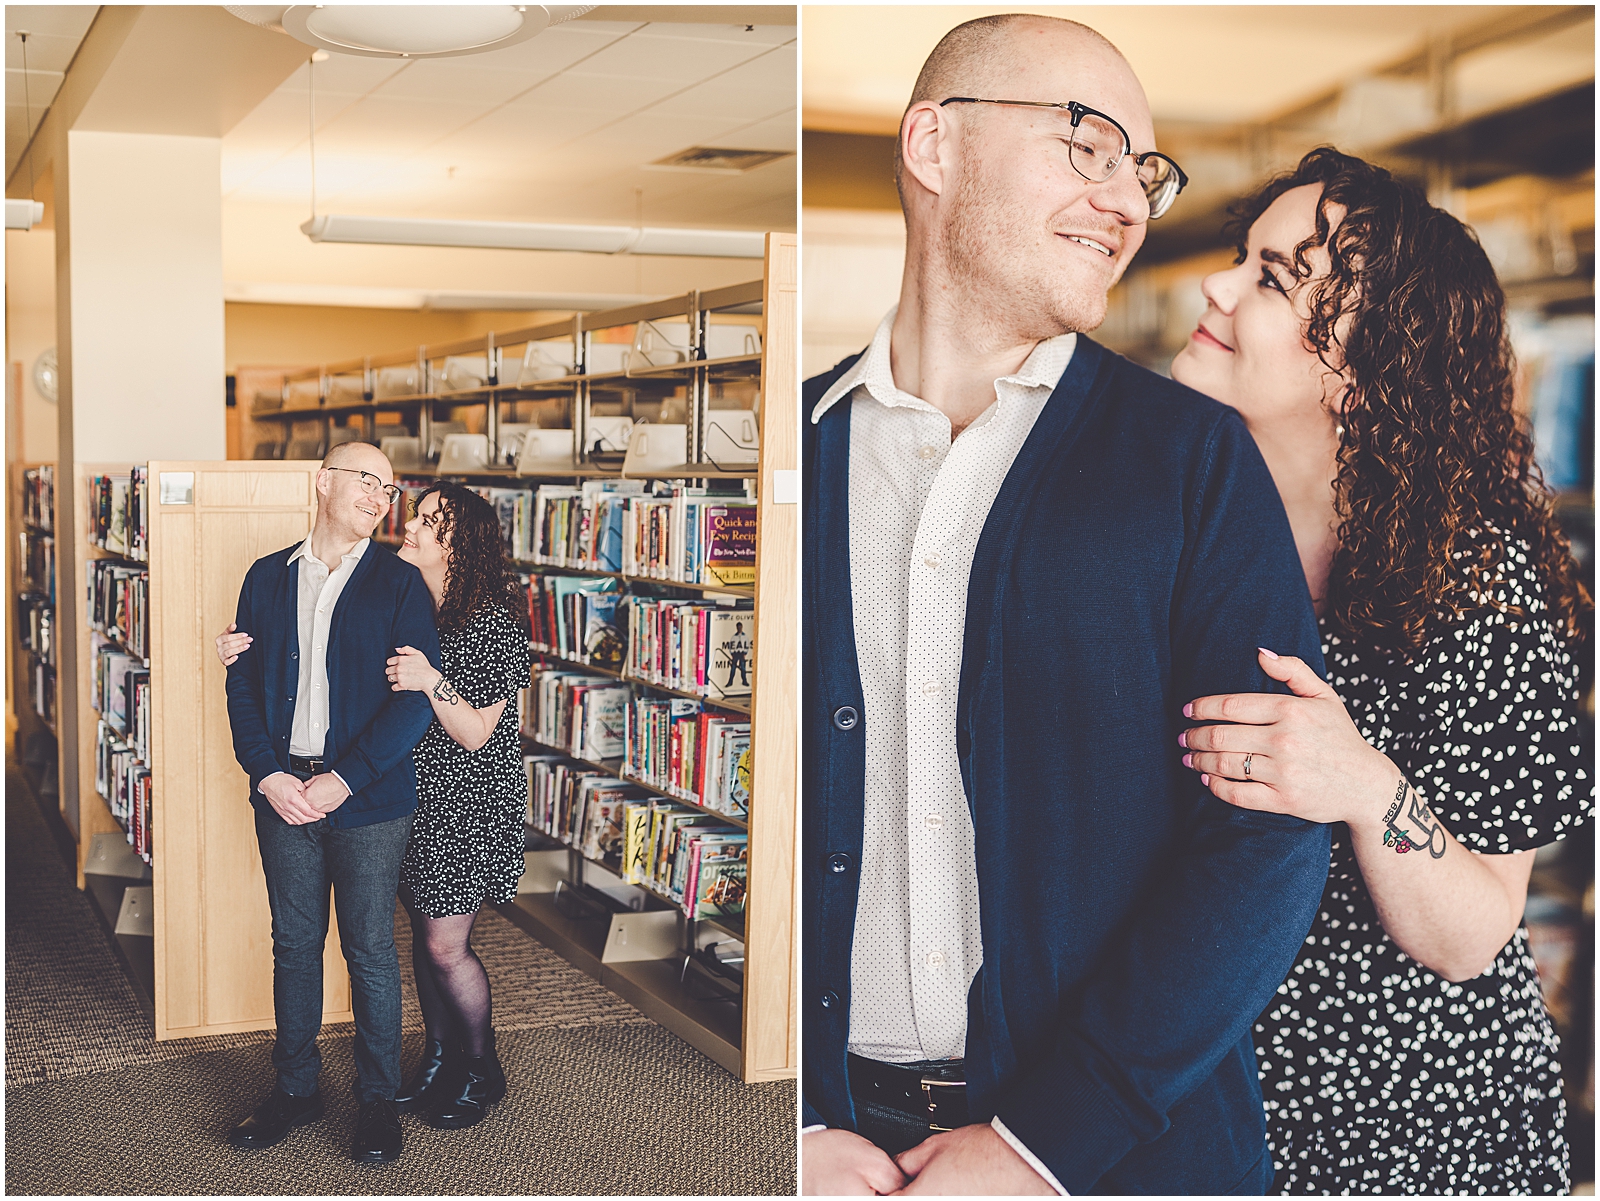 Lizzie & Jake's library engagement session in New Lenox, Illinois with Chicagoland wedding photographer Kara Evans Photographer.